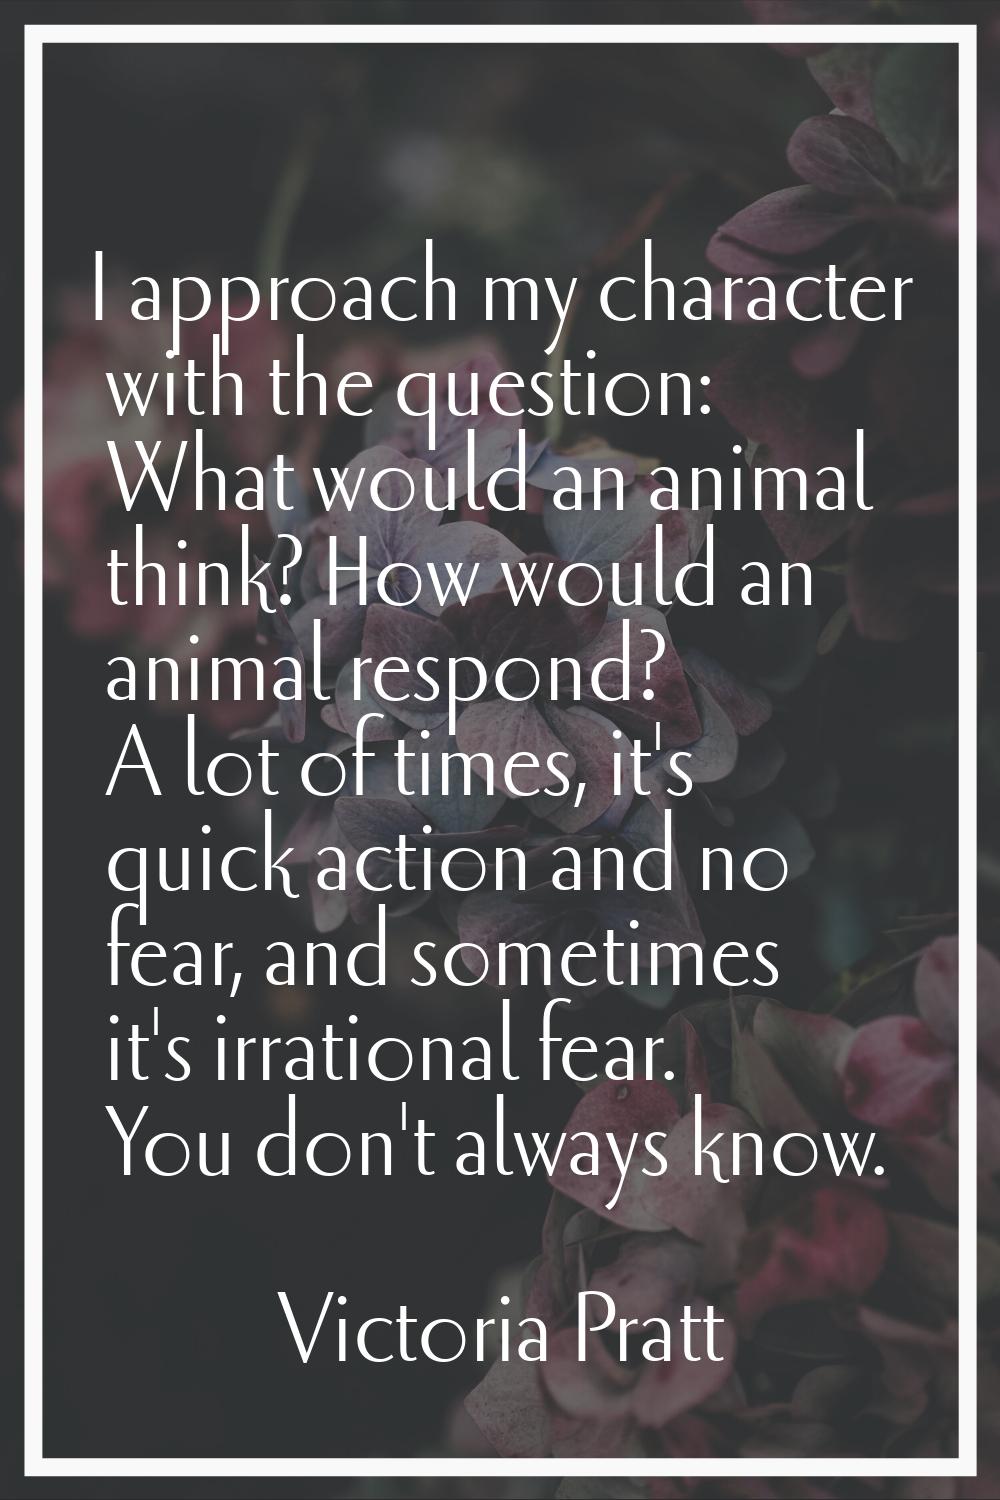 I approach my character with the question: What would an animal think? How would an animal respond?